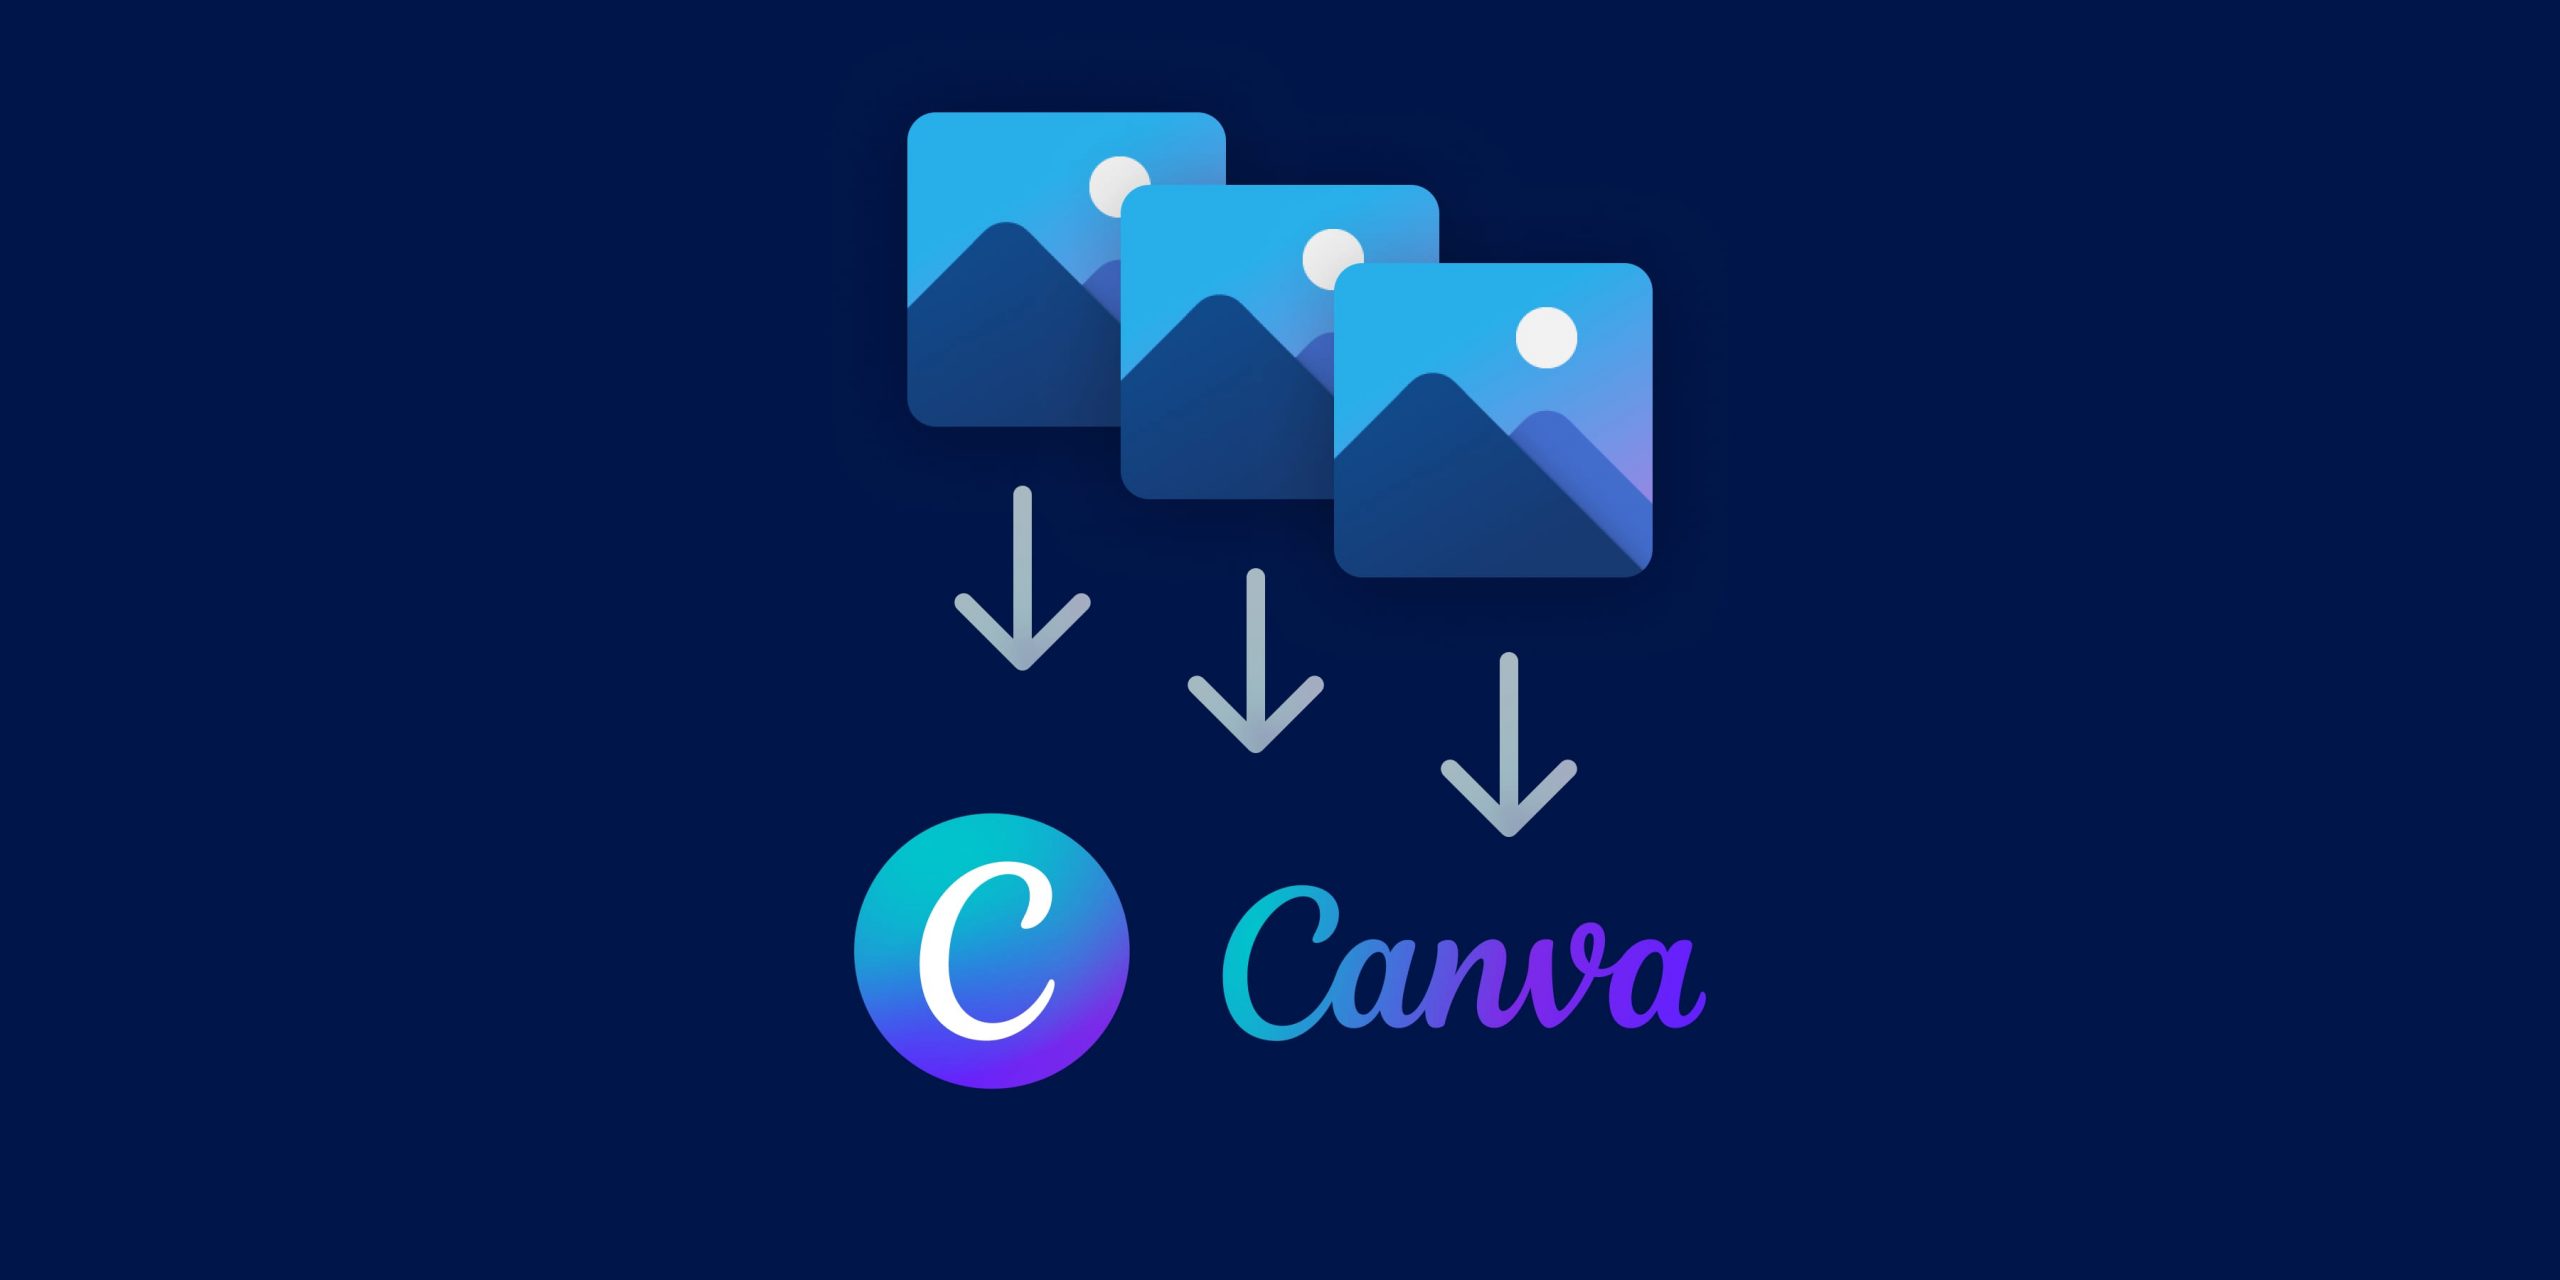 How to import images in Canva – A step-by-step guide